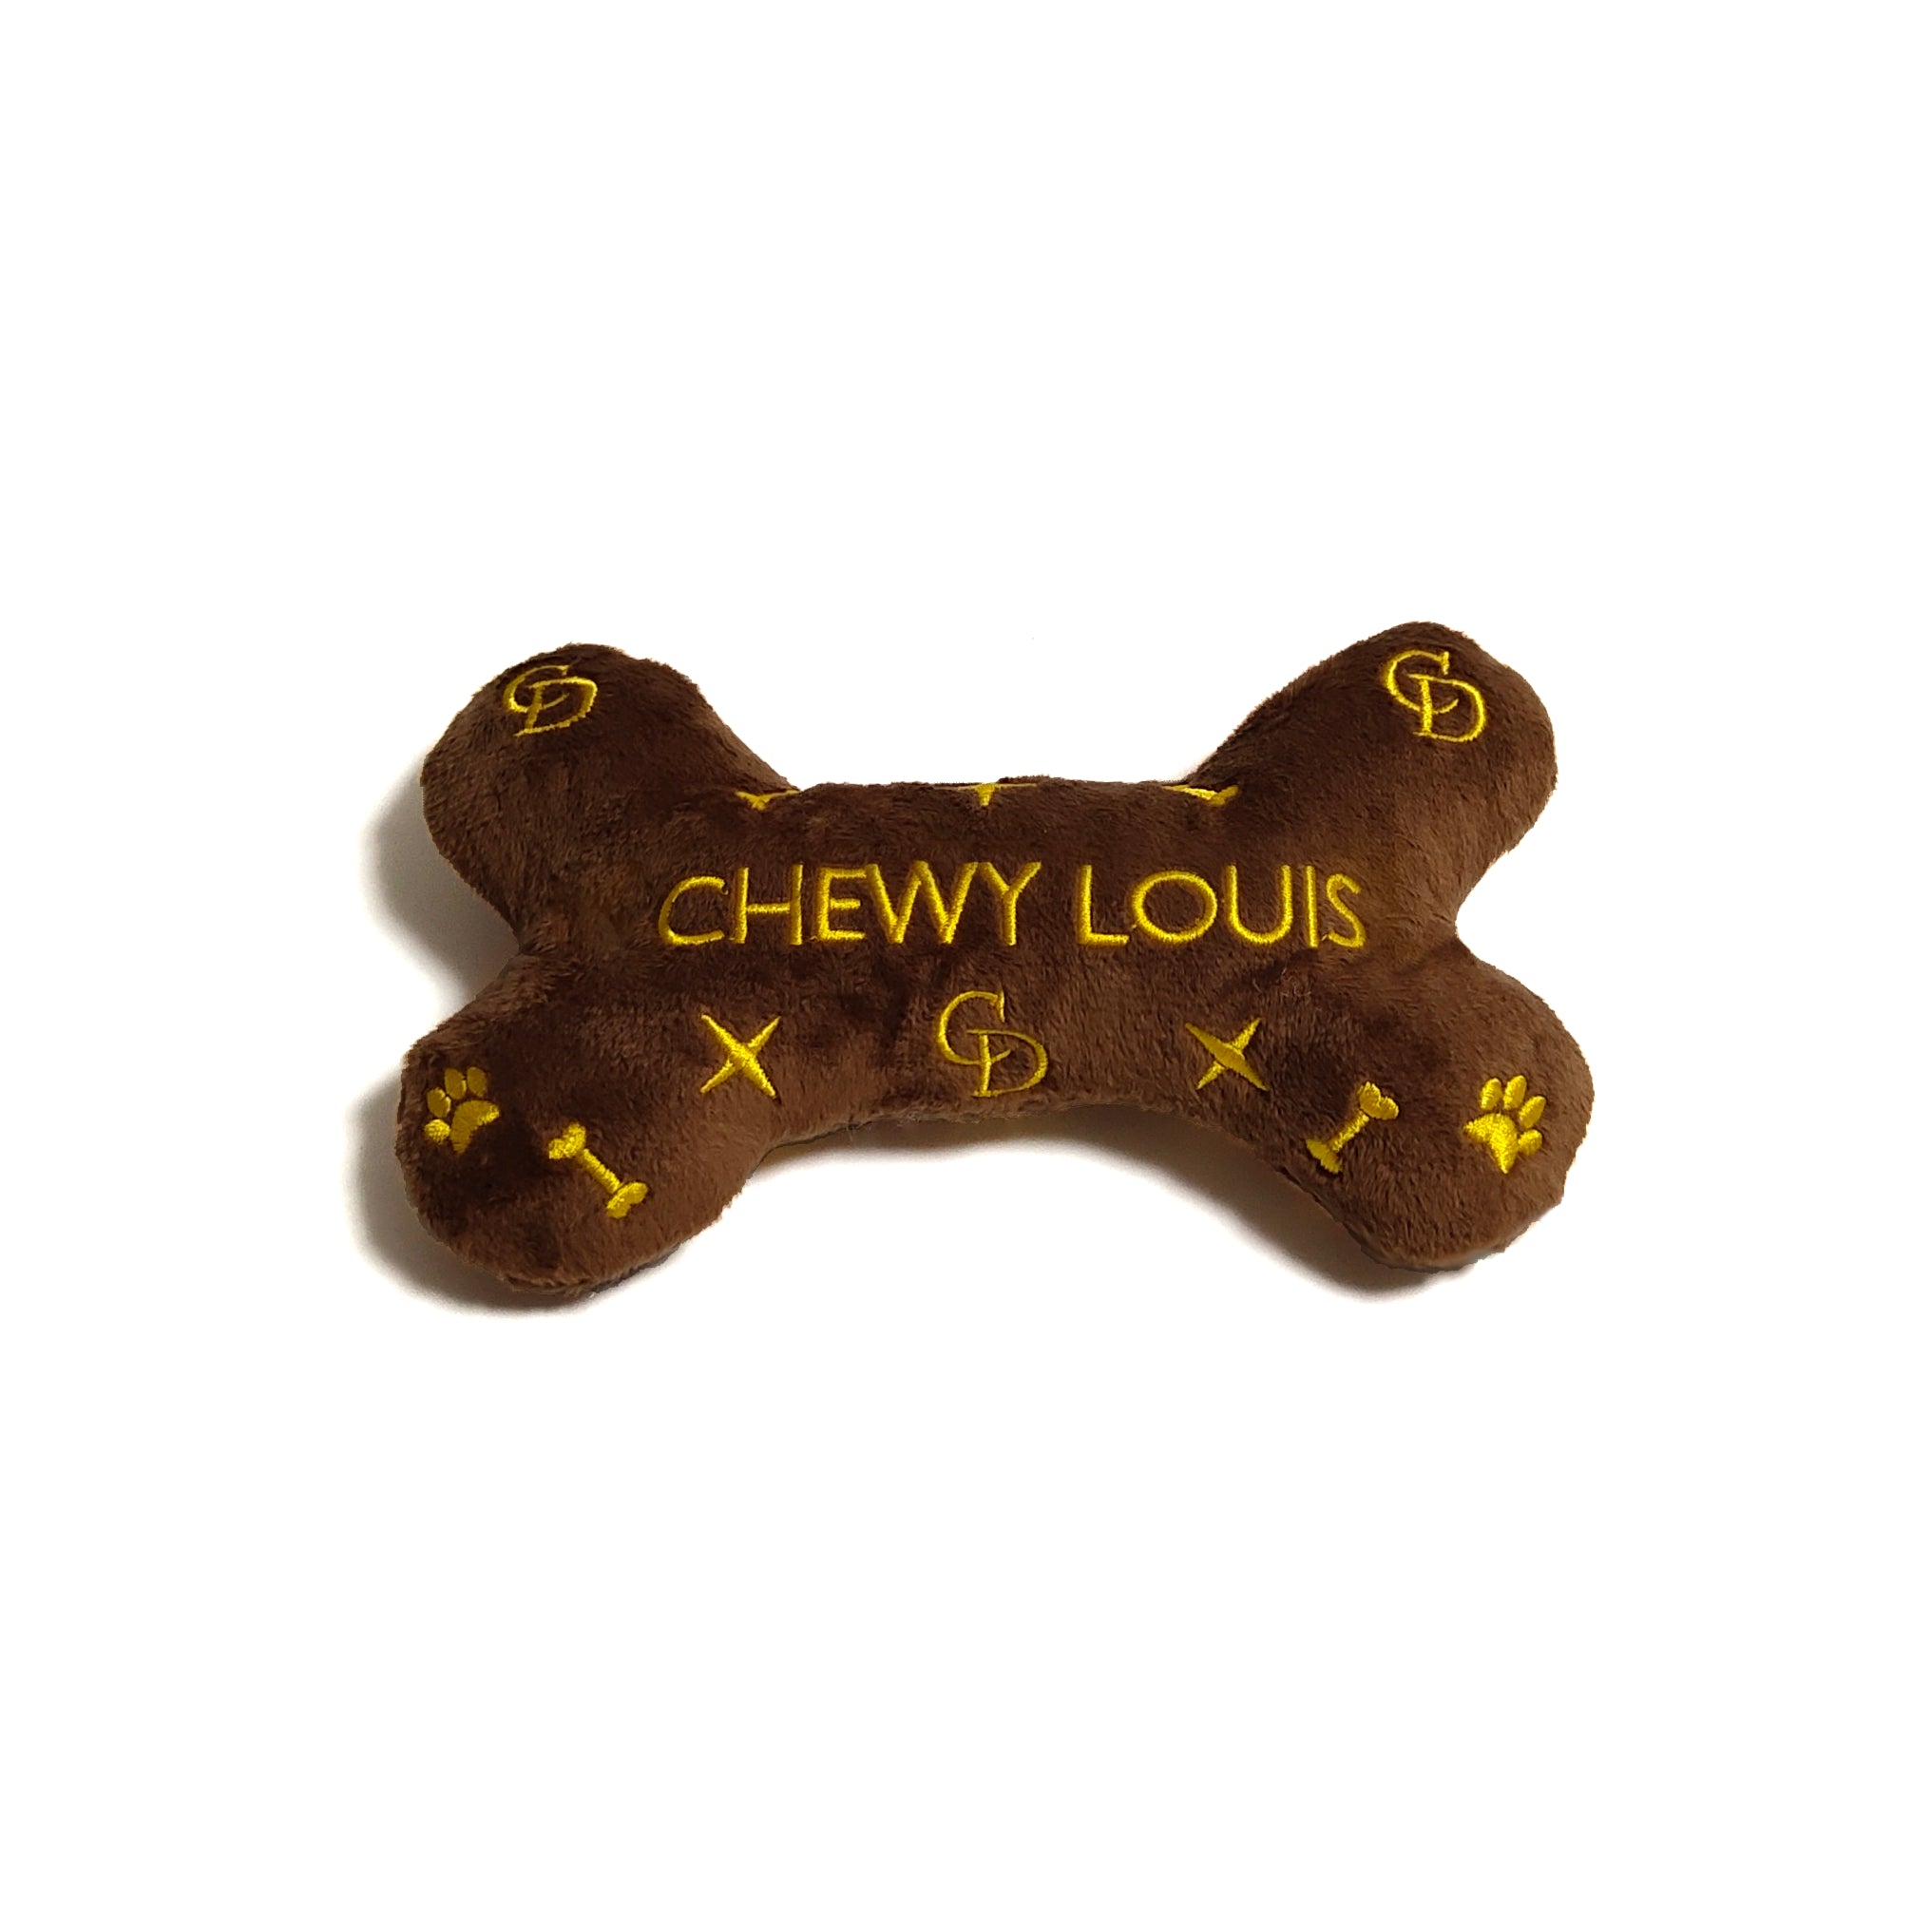 Chewy Louis Bone Dog Toy - Gifts For Dogs